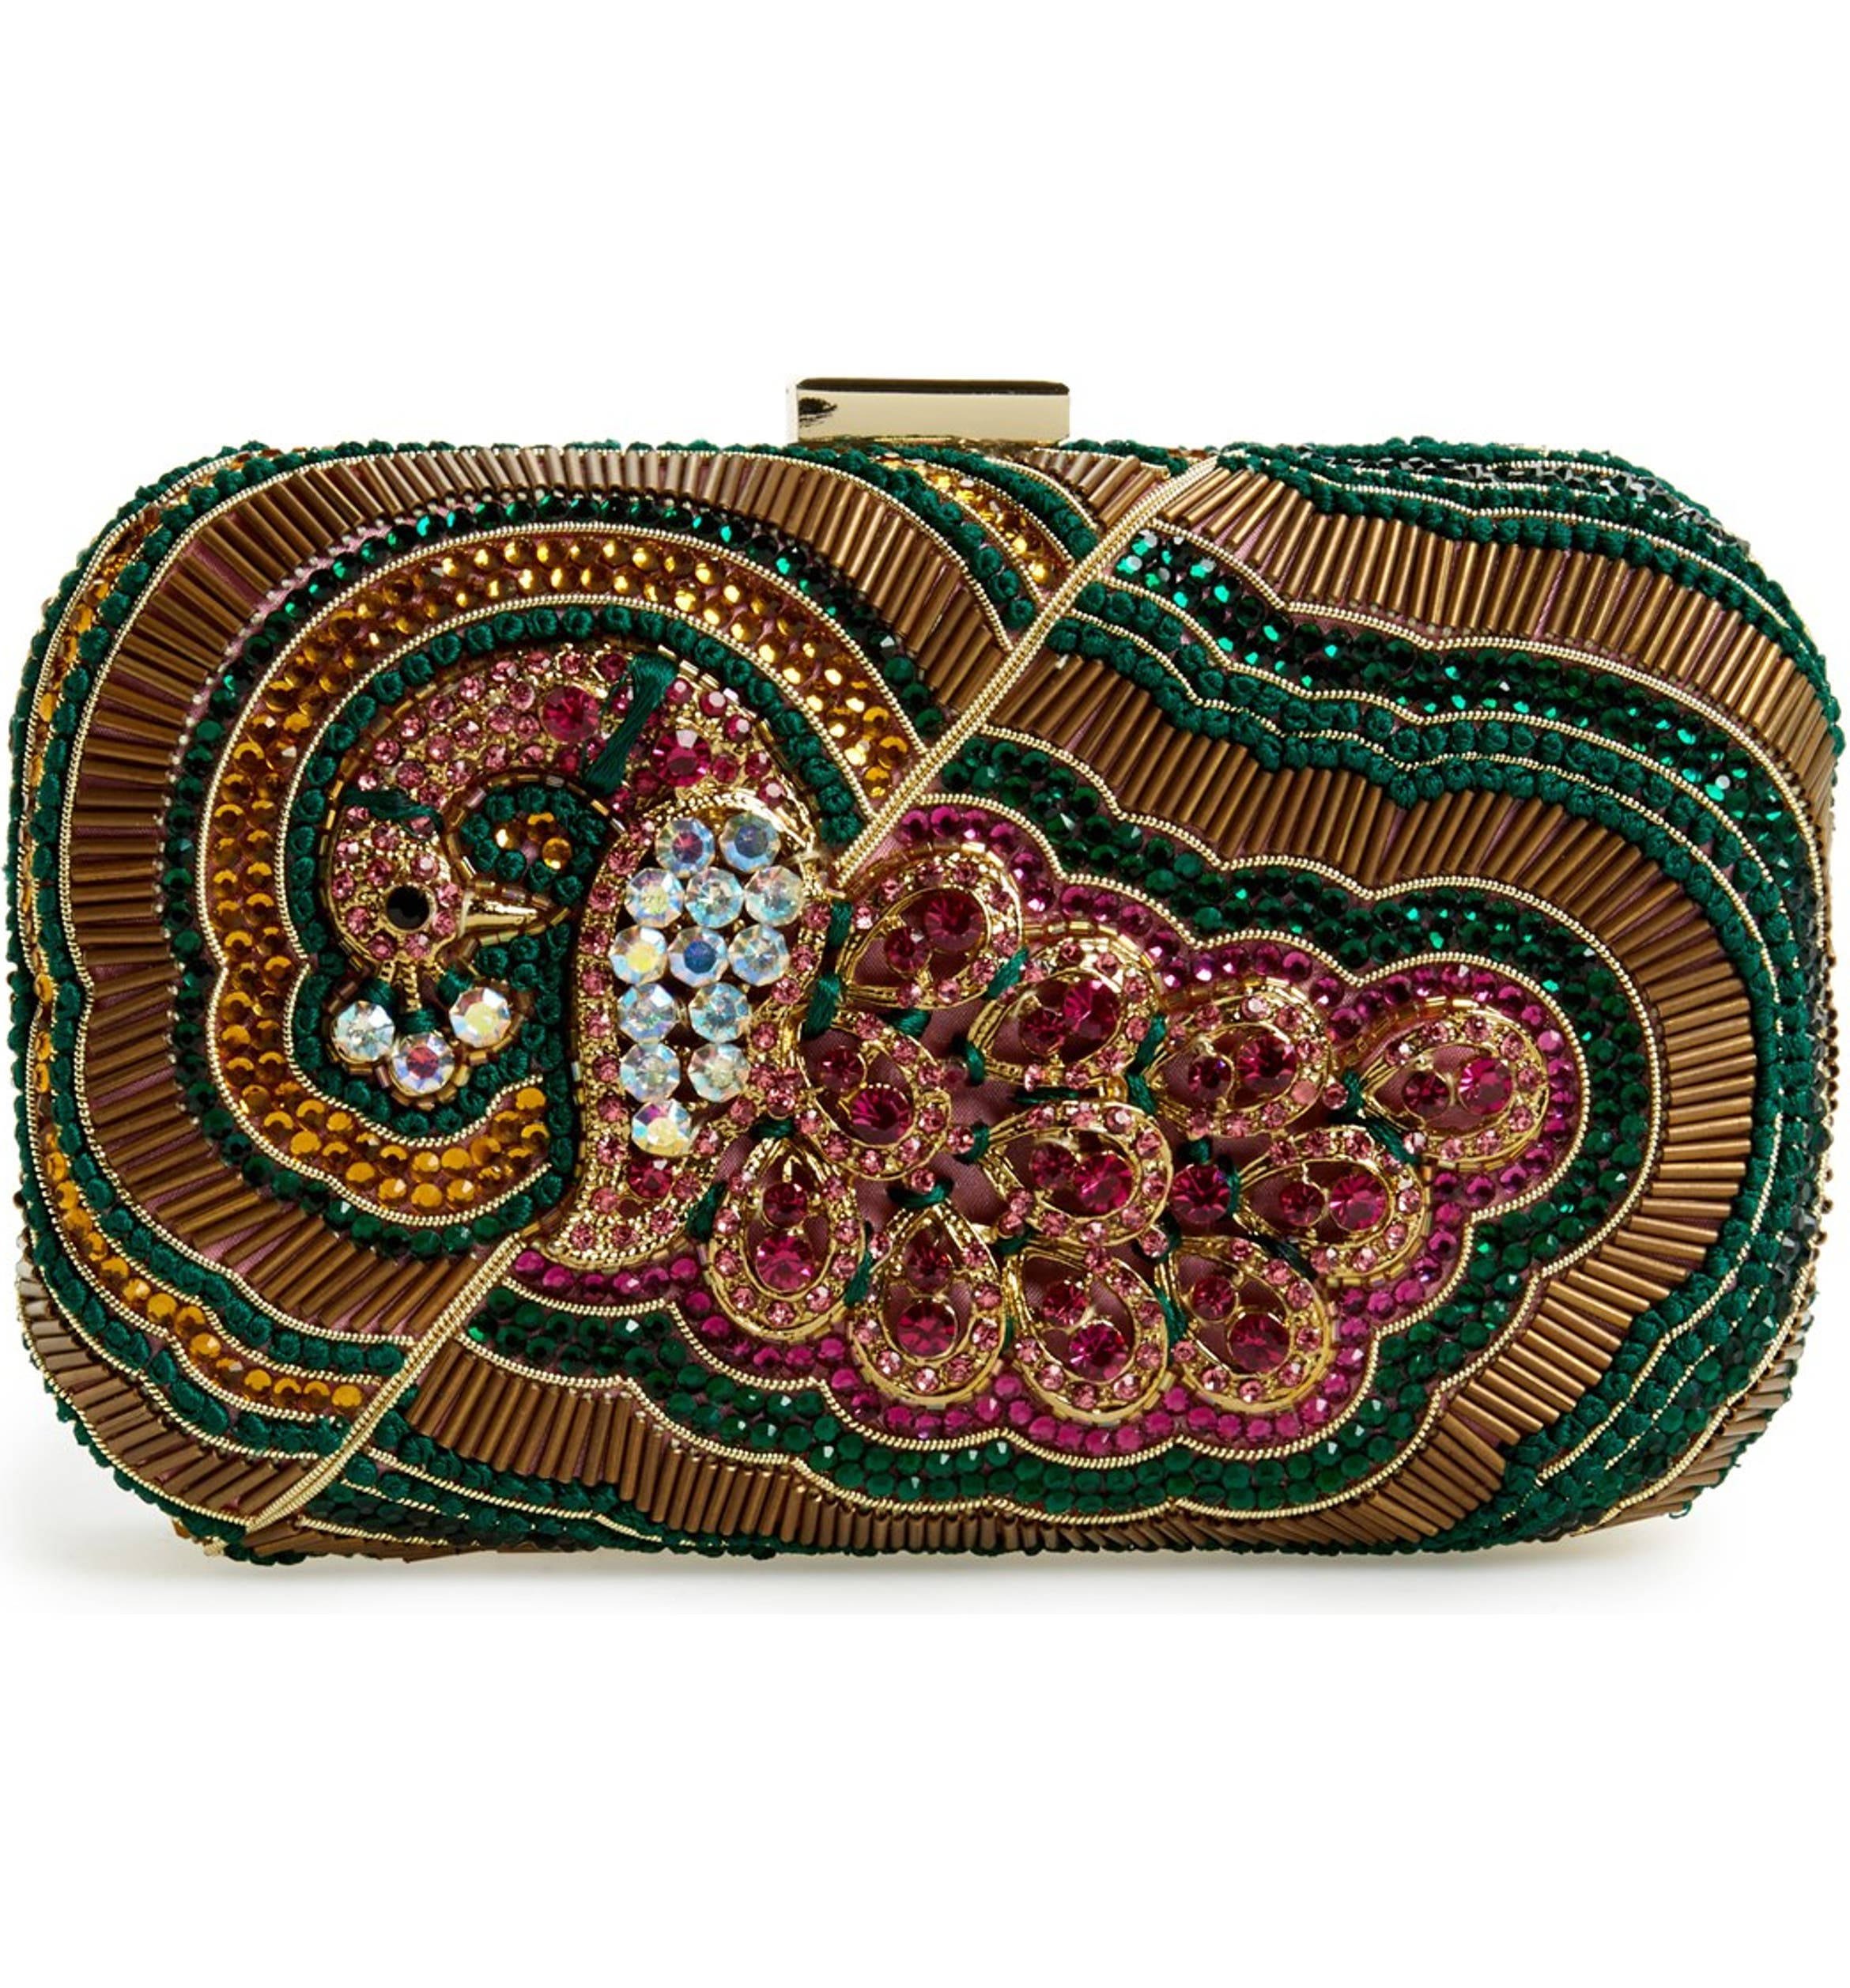 Natasha Couture 'Peacock Carnival' Clutch | Nordstrom